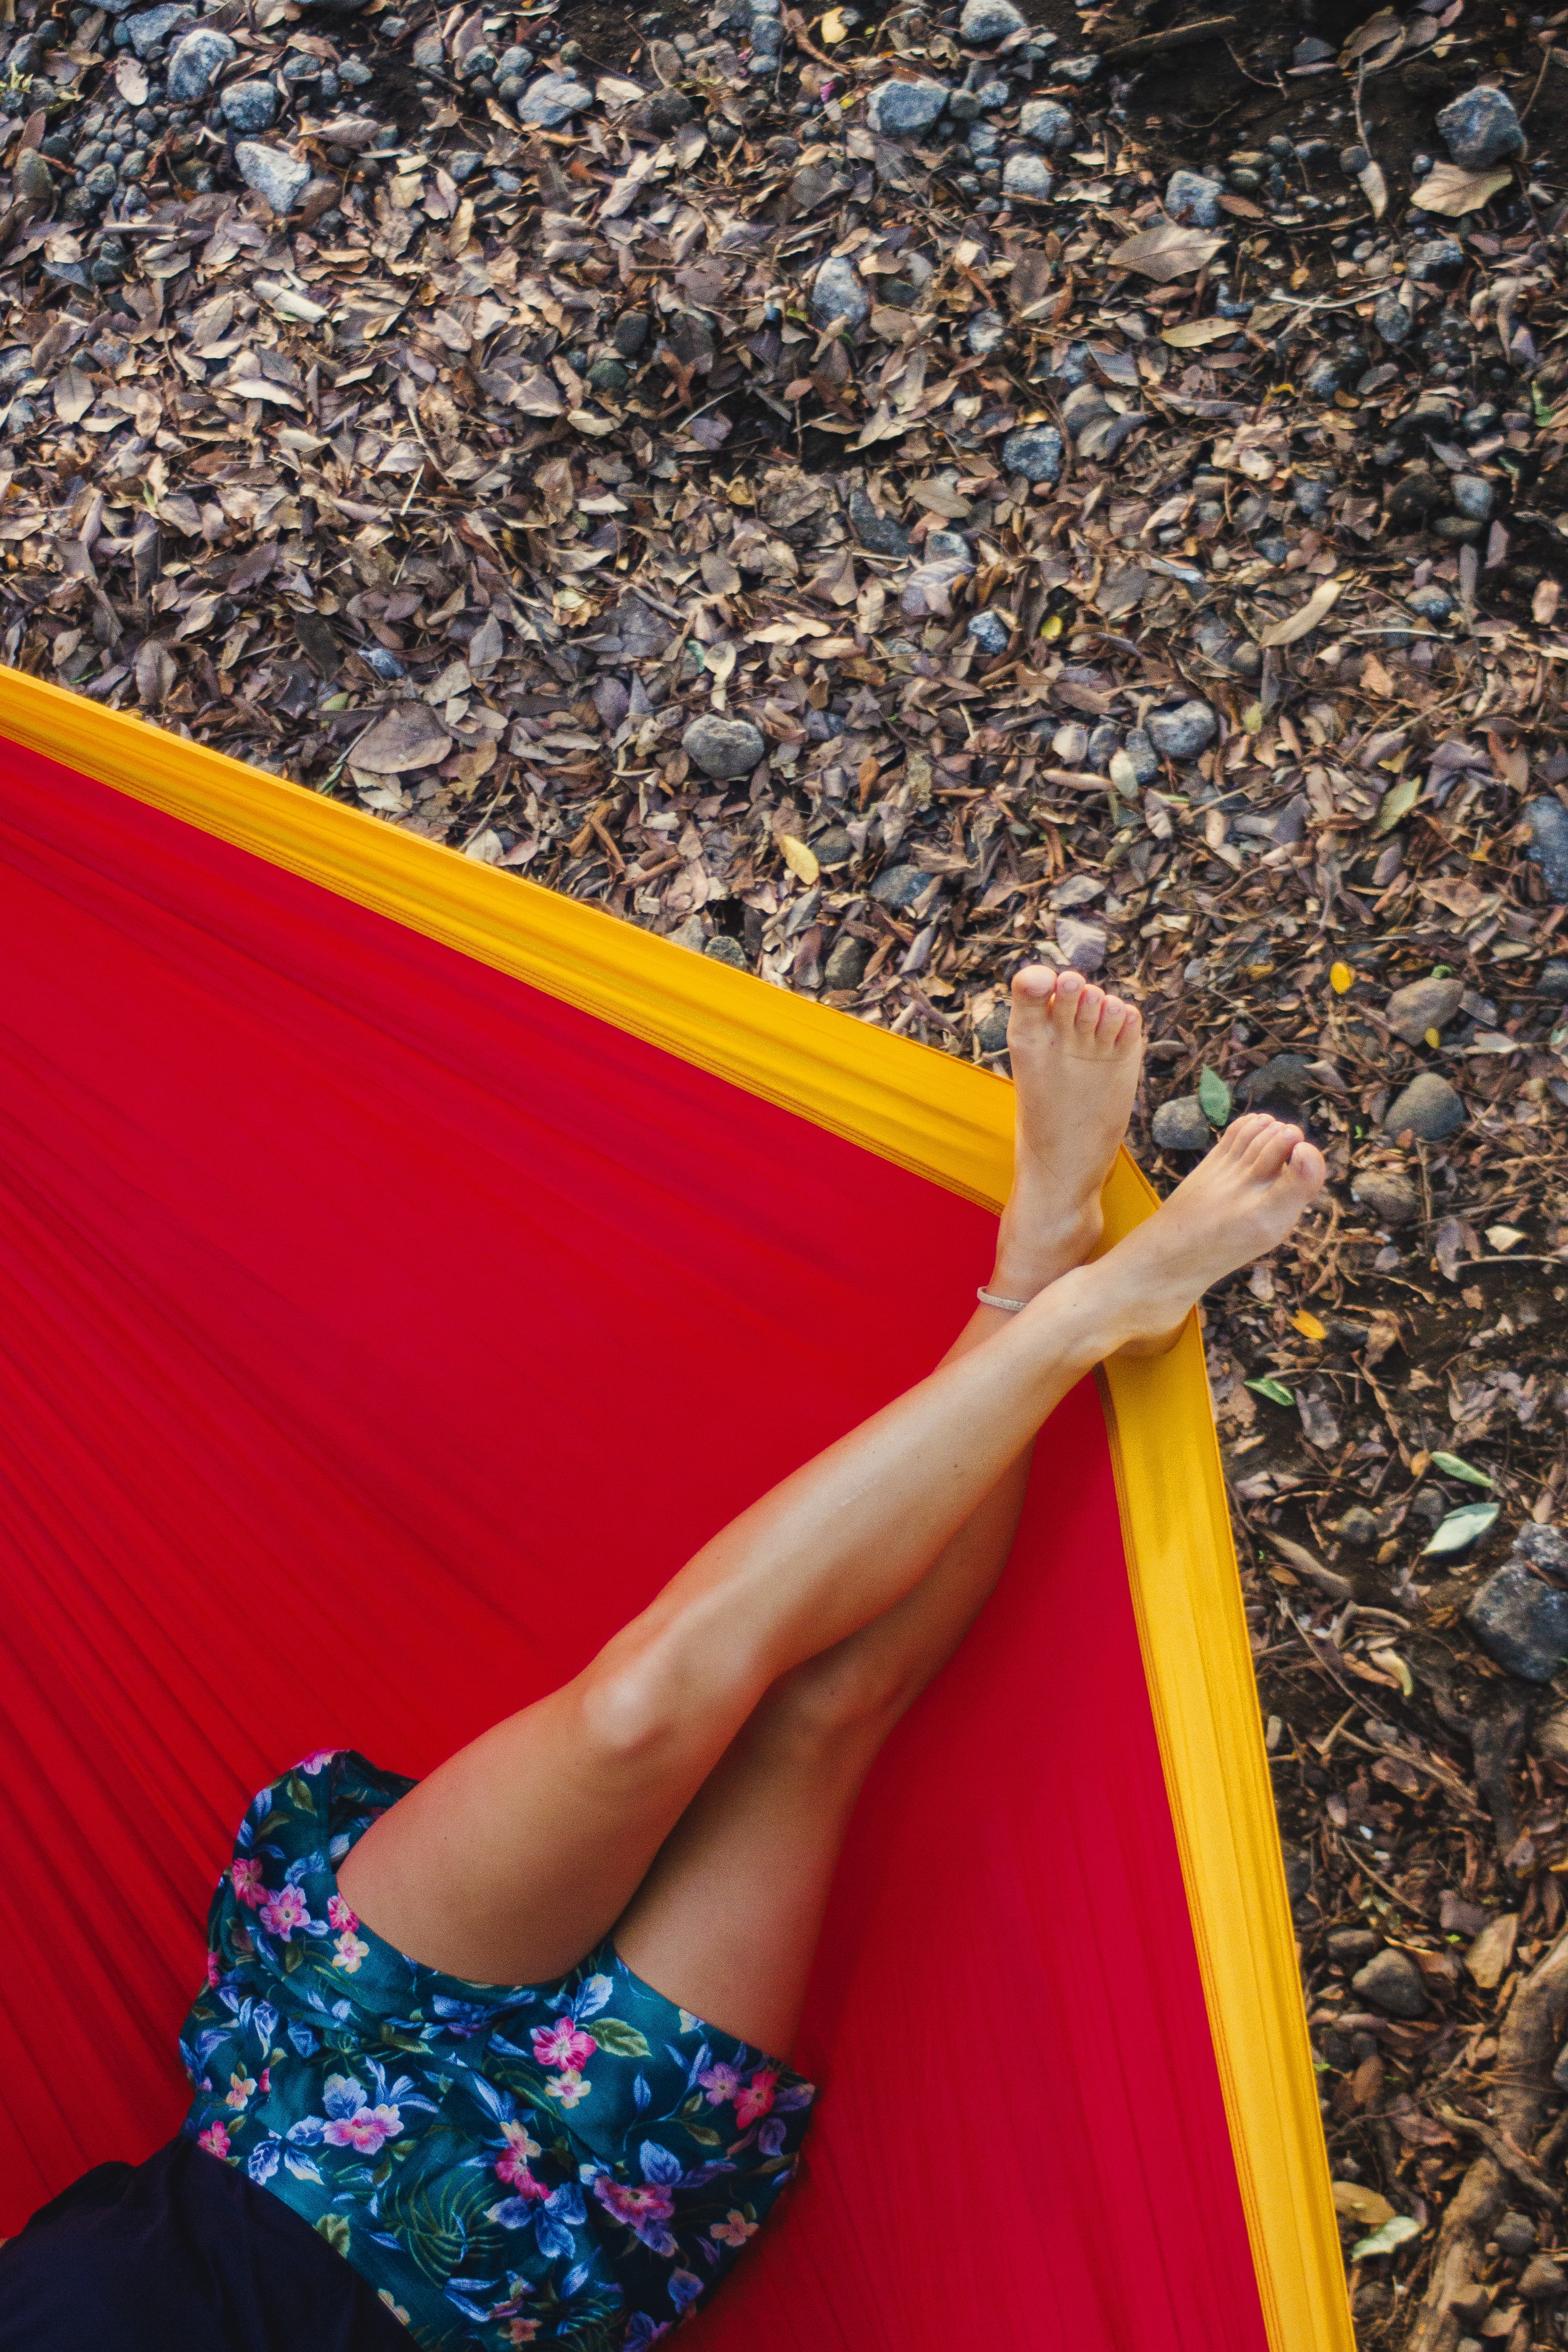 Free download wallpaper Miscellanea, Legs, Rest, Hammock, Miscellaneous, Relaxation, Girl on your PC desktop